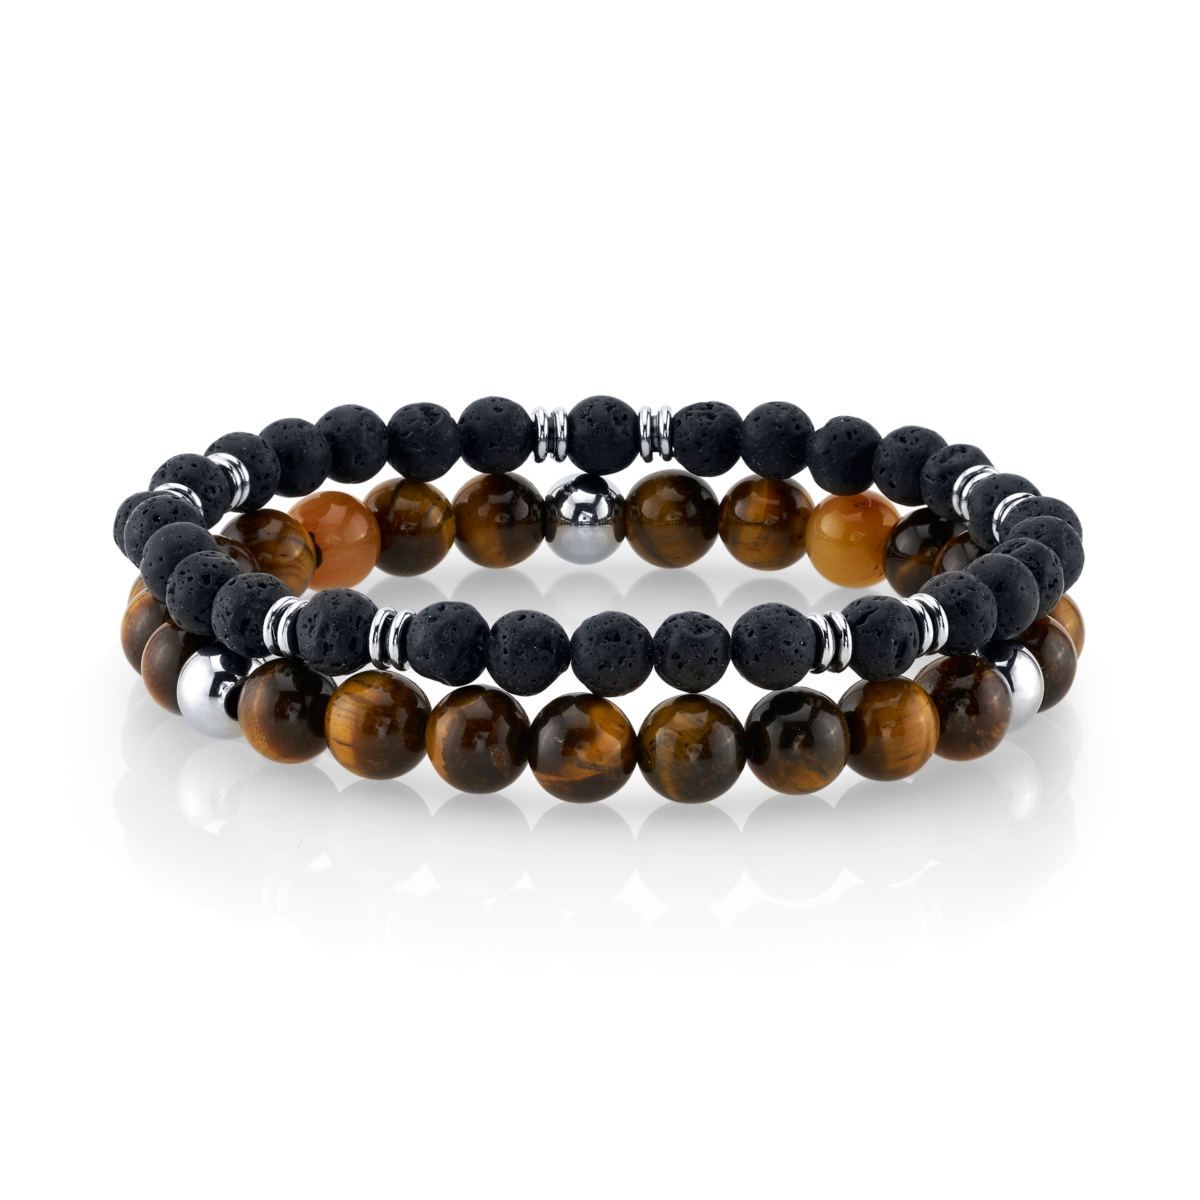 He Rocks Tiger Eye Stone and Black Lava Bead Double Bracelet with Stainless Steel Beads, 8.5"